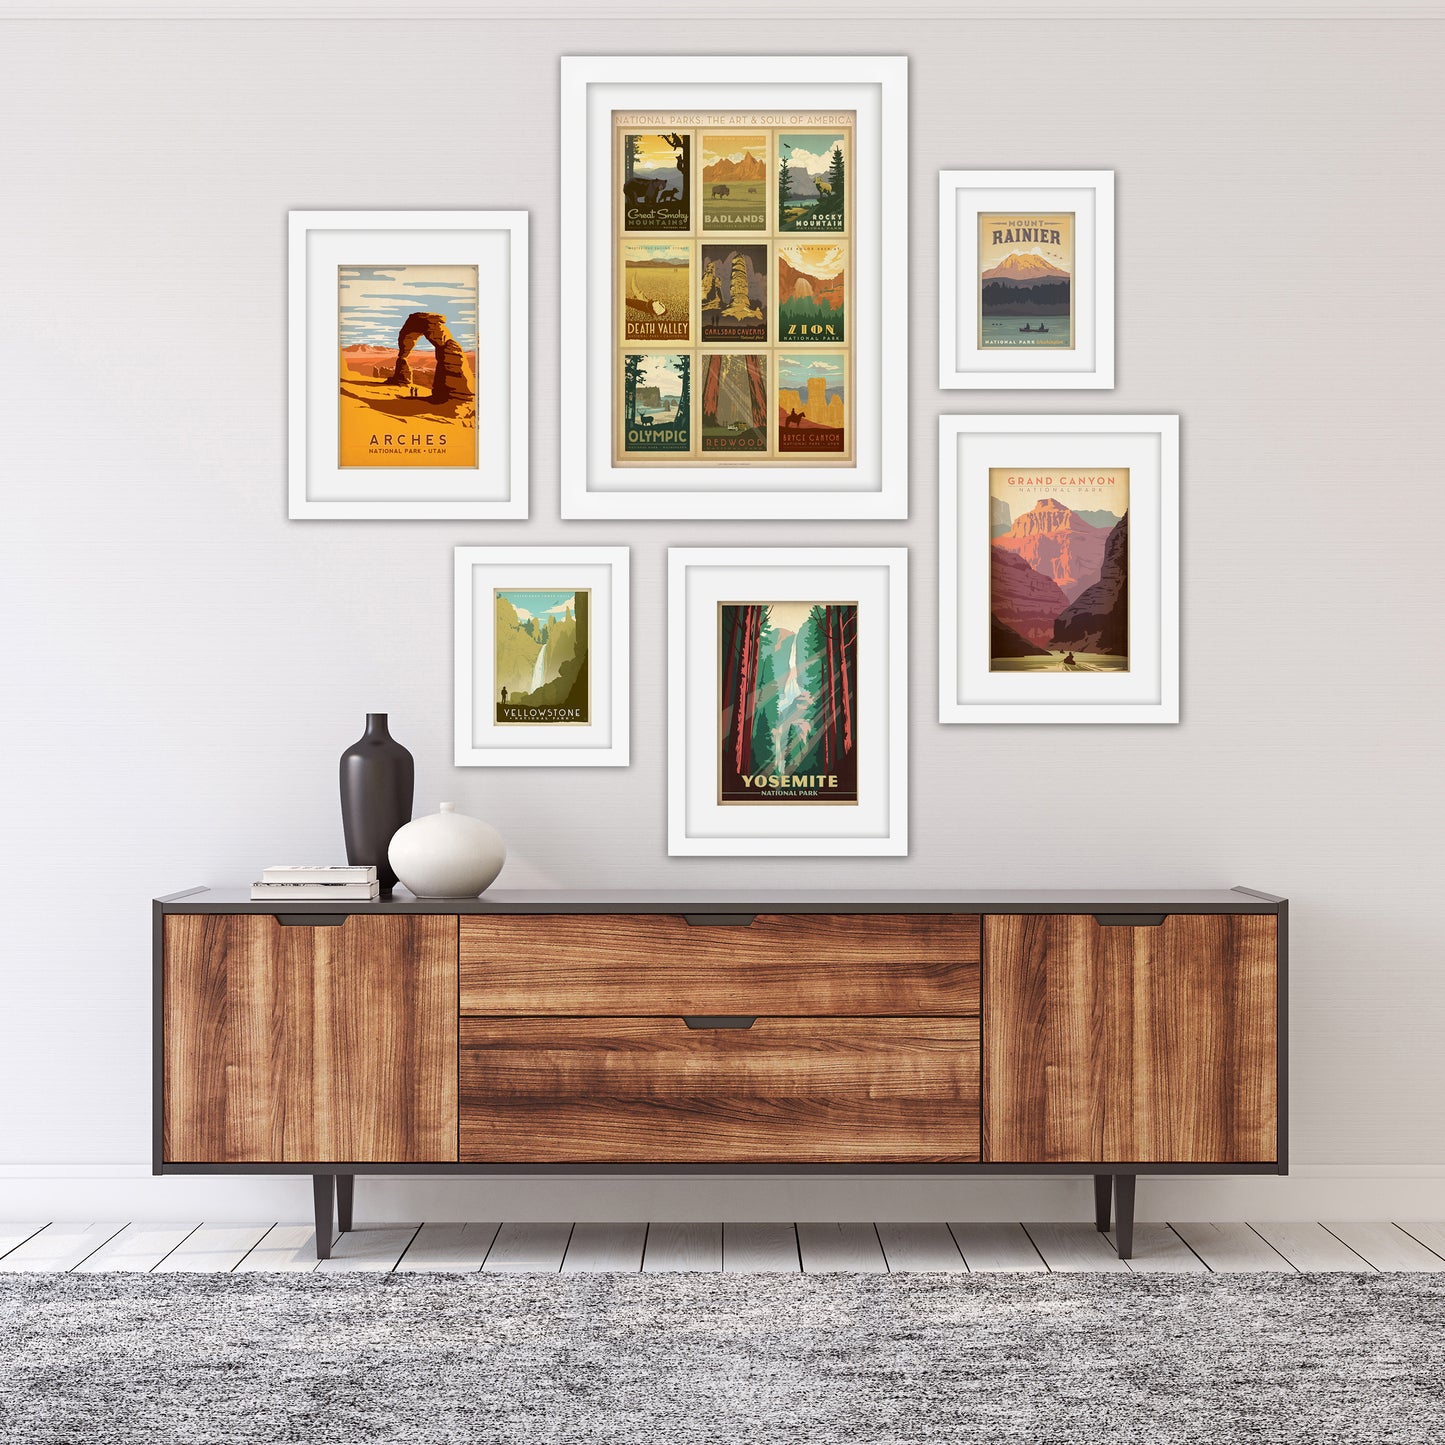 Americanflat Botanical Modern (set Of 6) Framed Prints Gallery Wall Art Set  Green Mountains By Louise Robinson : Target